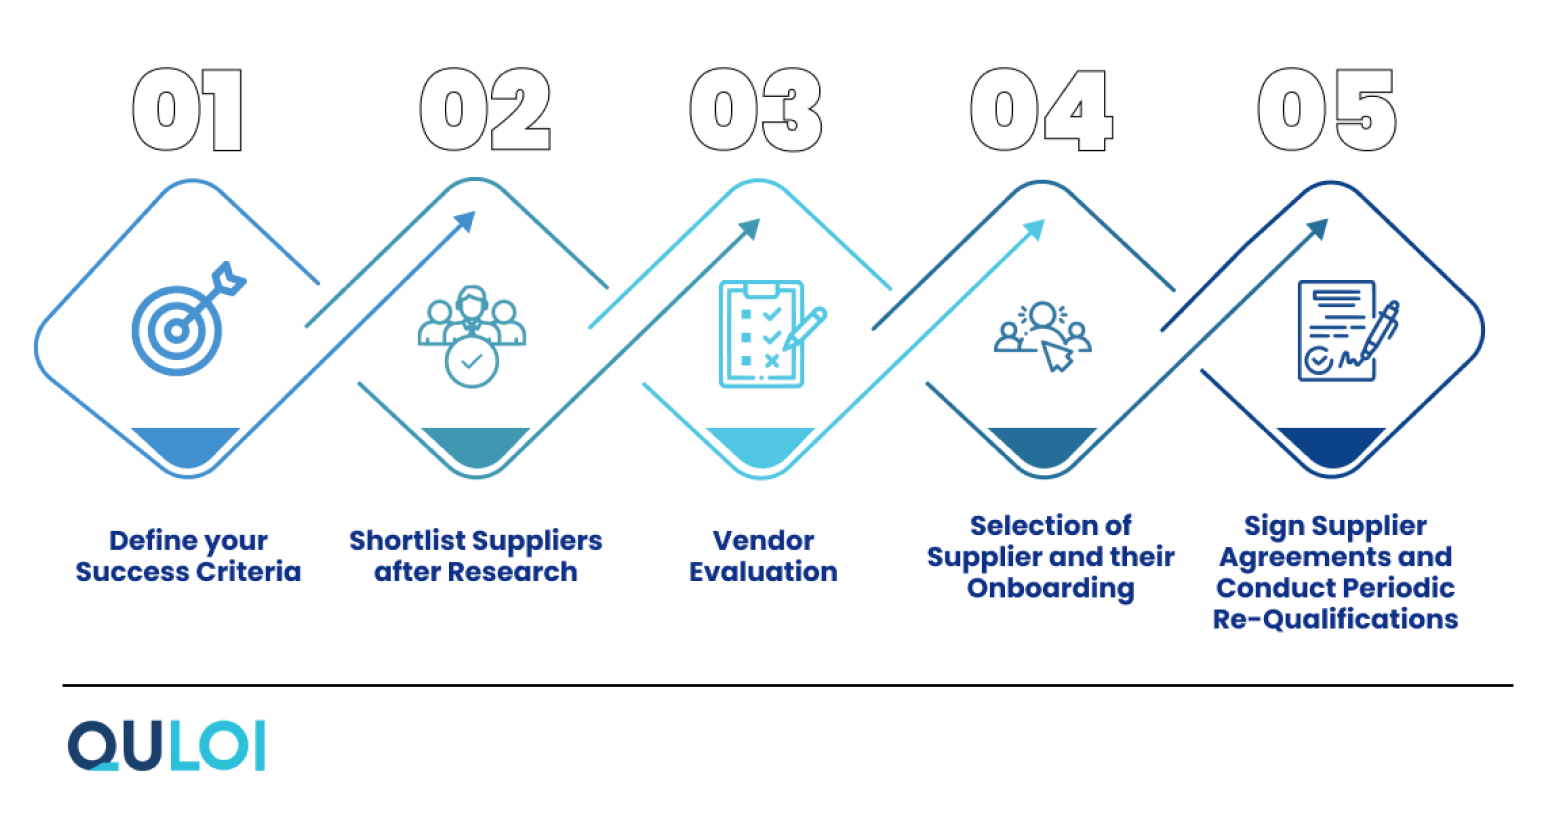 Approach to Supplier Onboarding